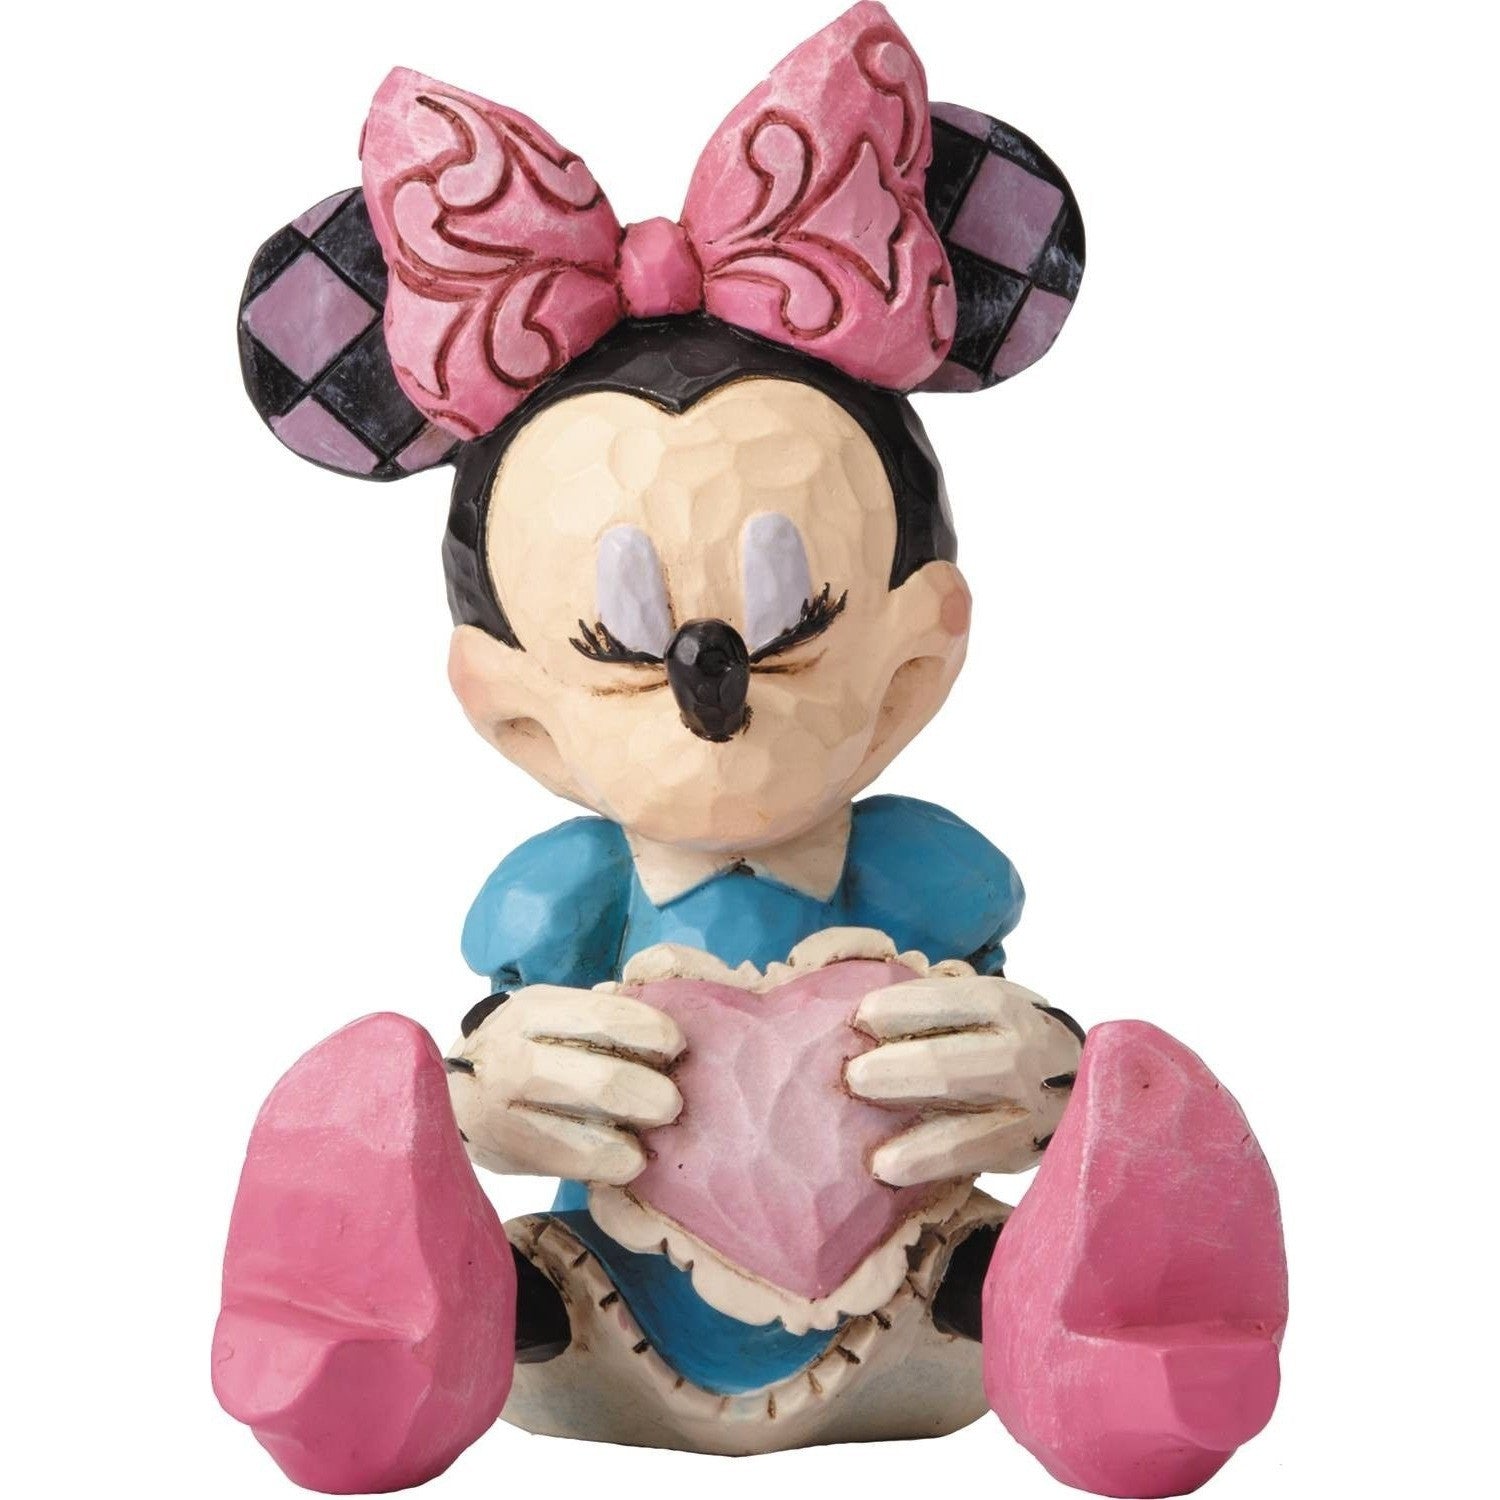  Disney Traditions Minnie Mouse Tree Ornament Uncanny!